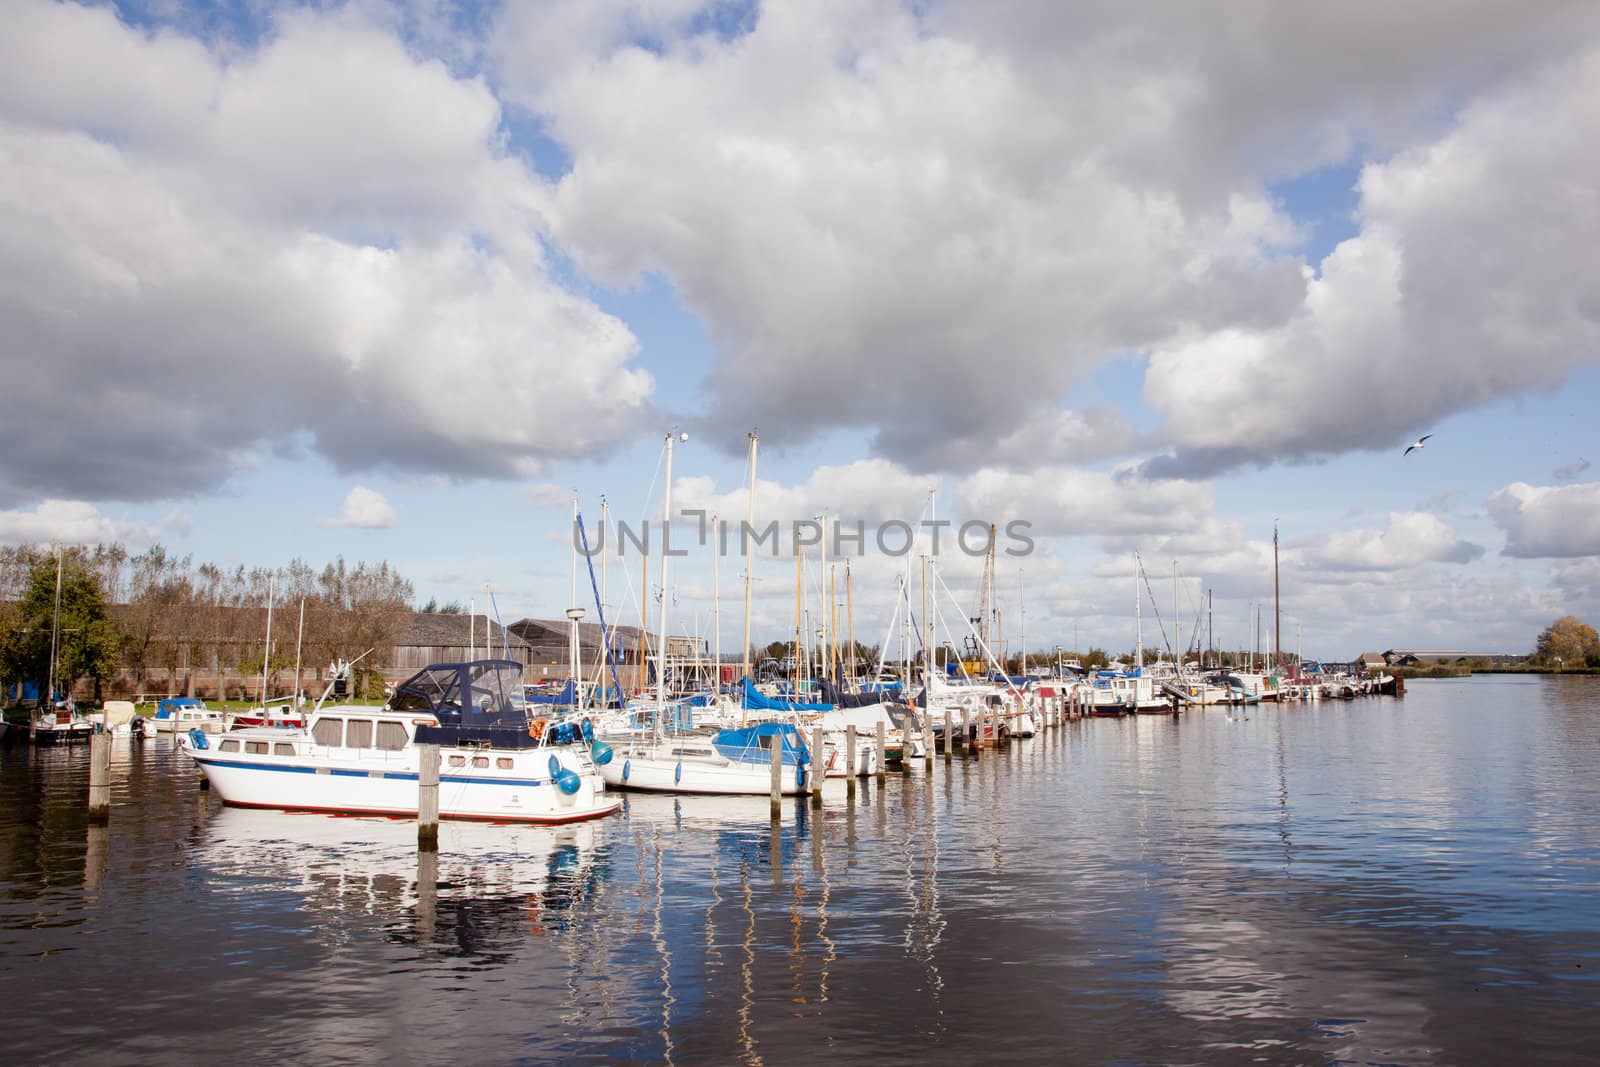 Dutch harbour with boats and clouds in blue sky